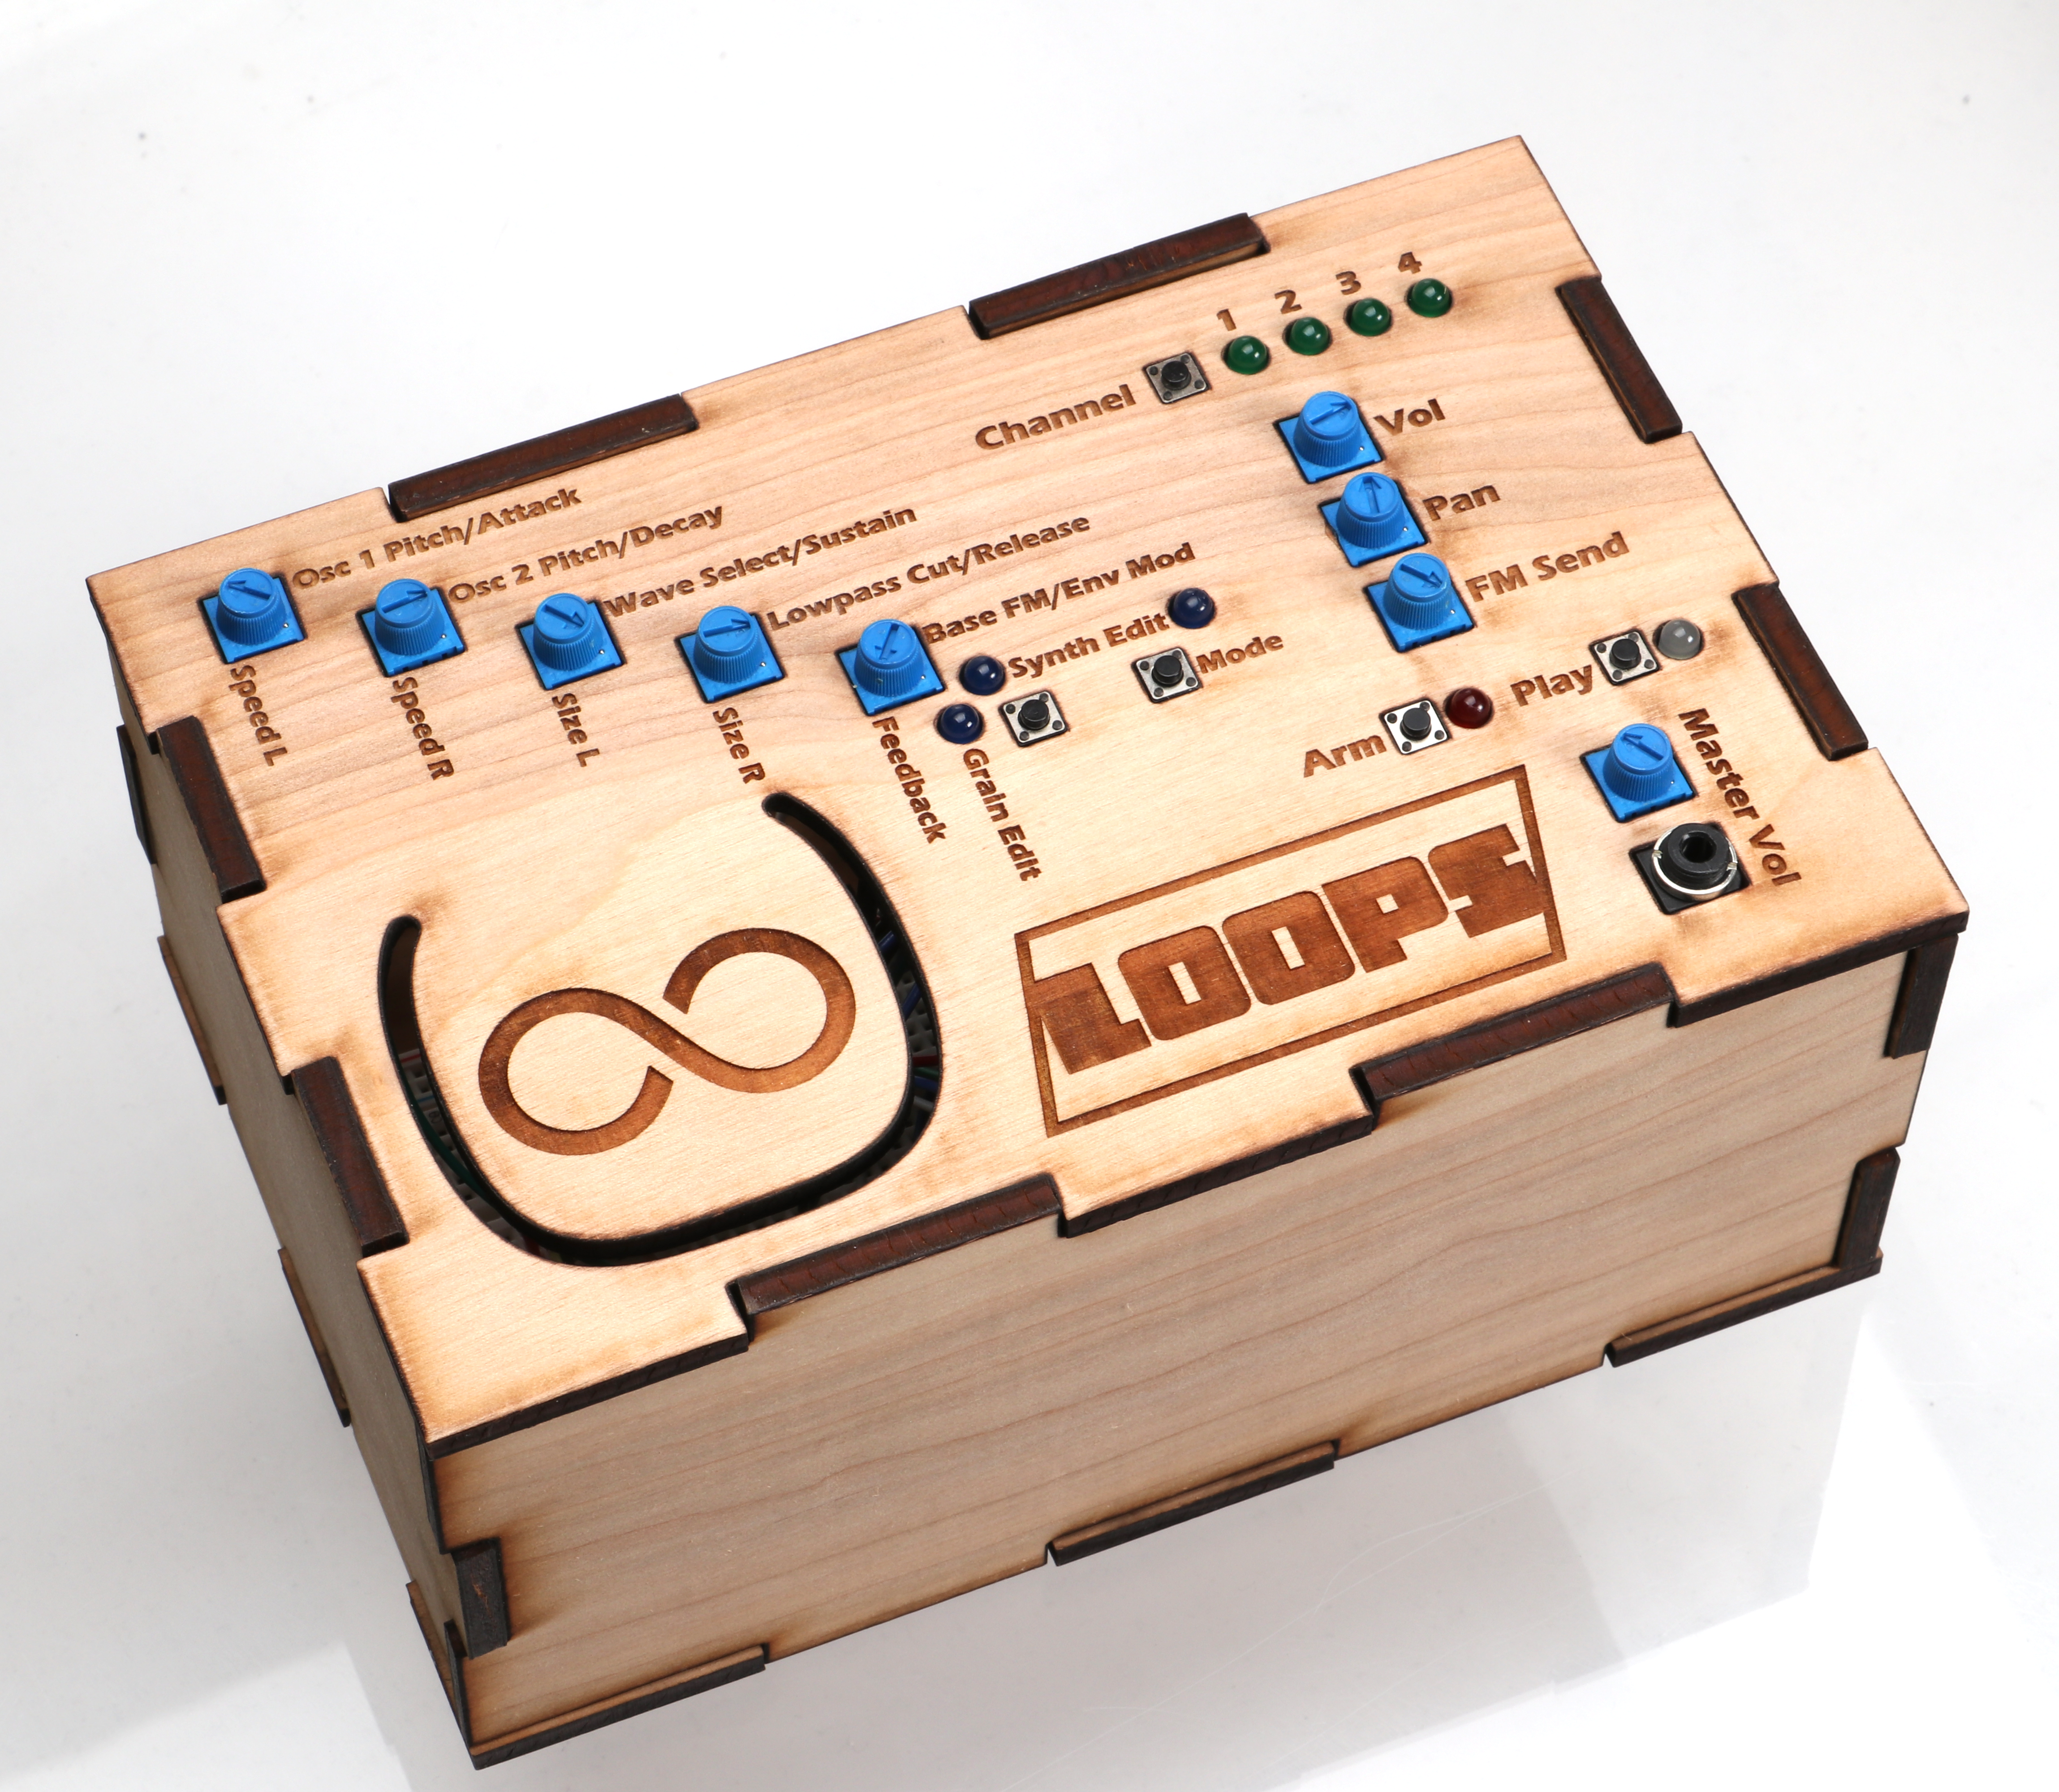 A laser cut wooden box with electronics controls embedded in the lide.